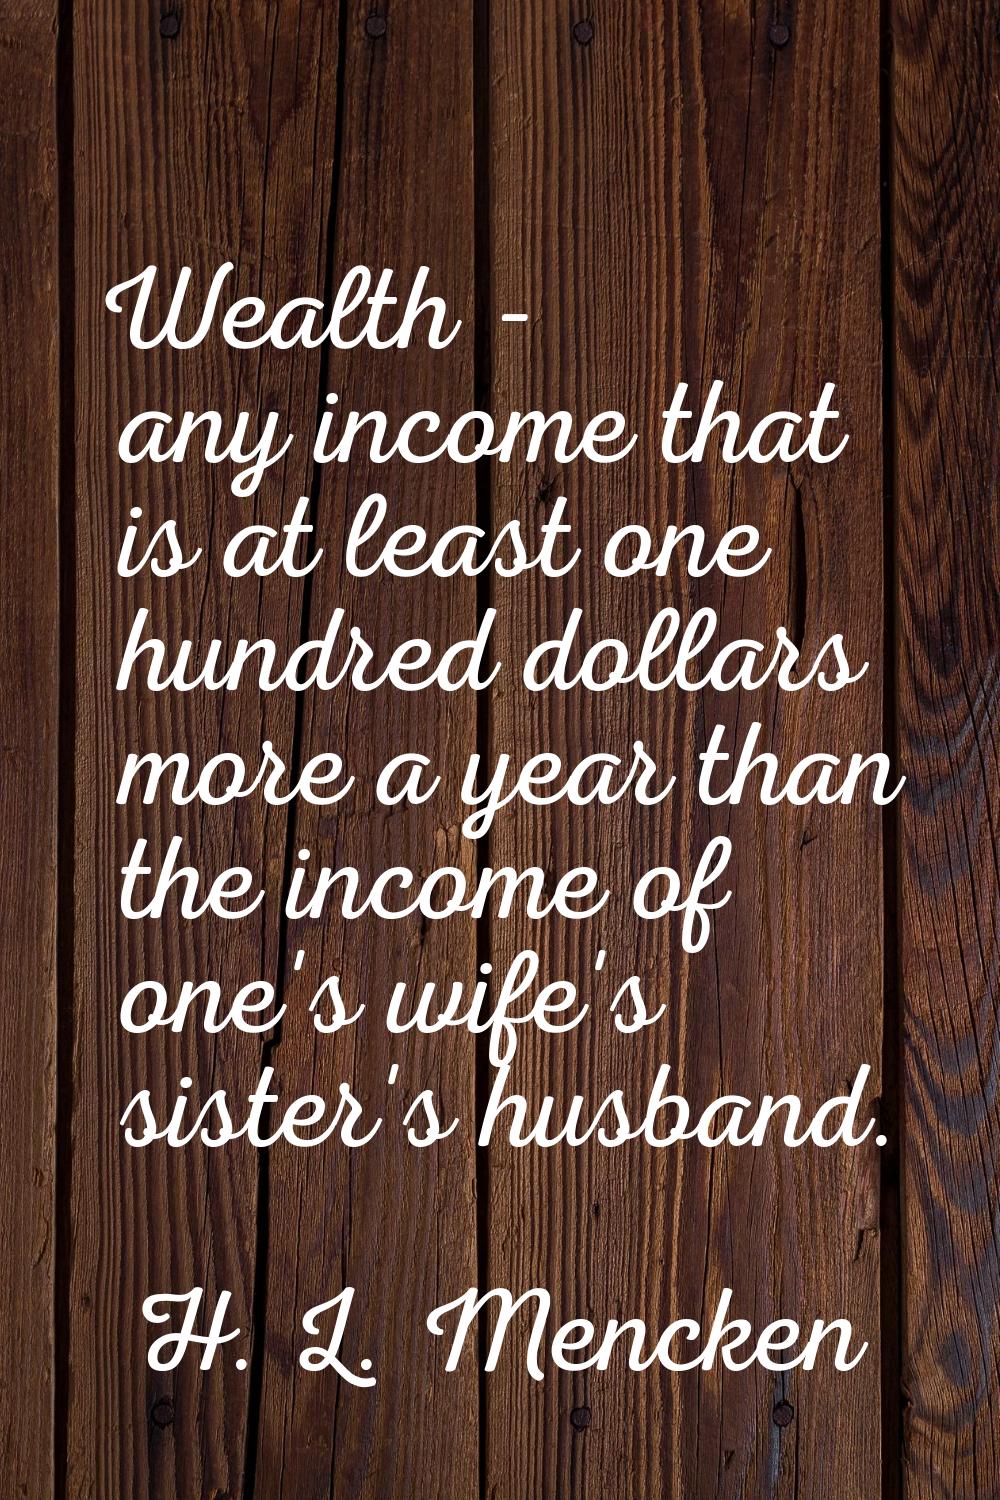 Wealth - any income that is at least one hundred dollars more a year than the income of one's wife'